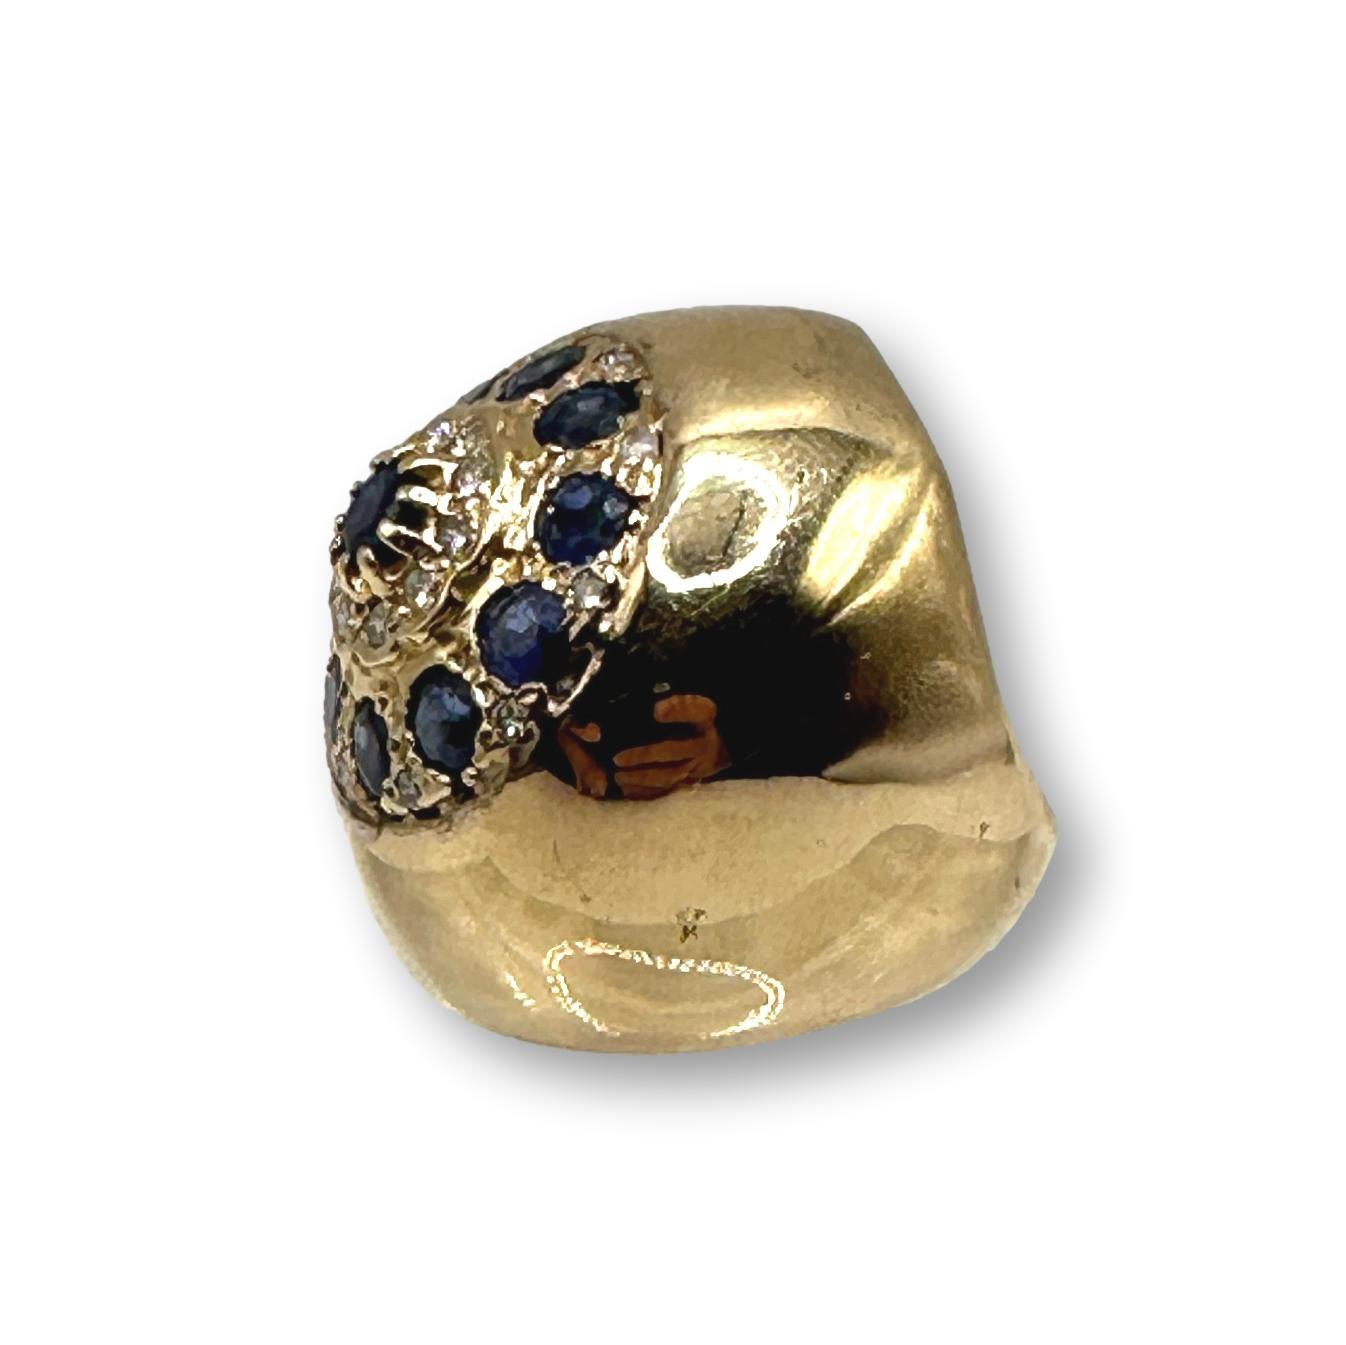 Huge 14K Gold Ring with Sapphires and Diamonds